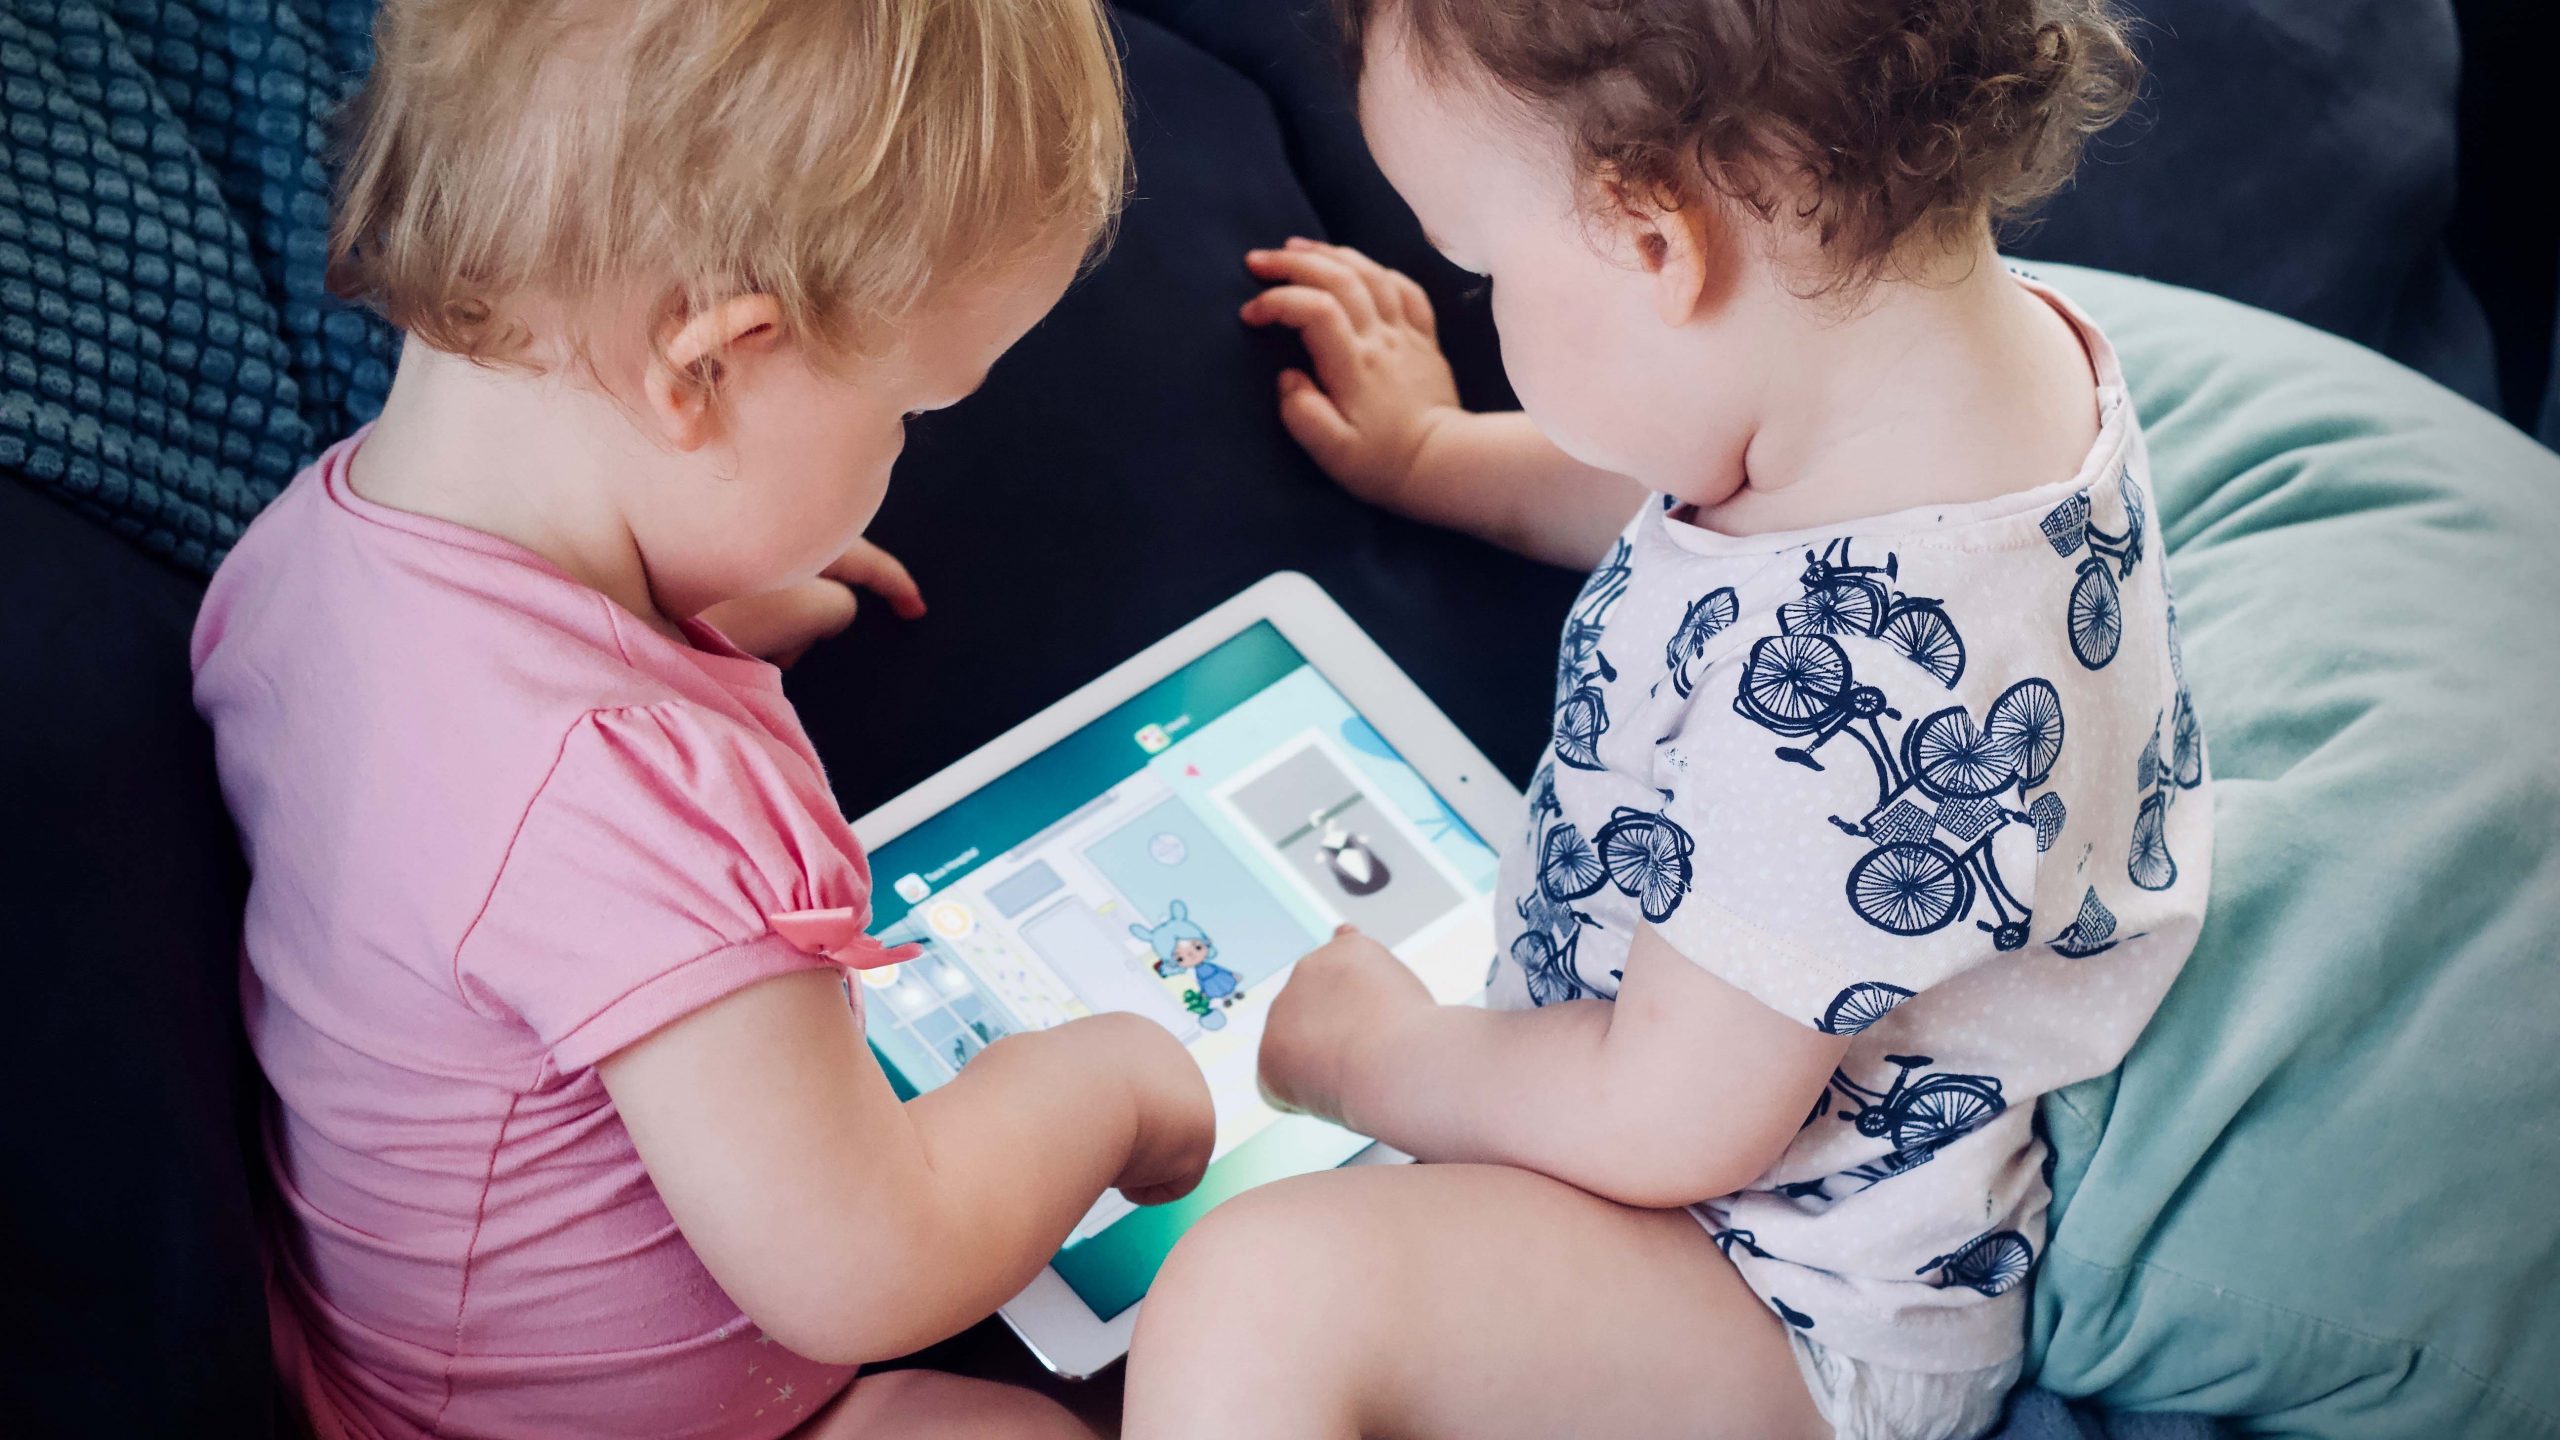 two little kids plyaing together with an ipad